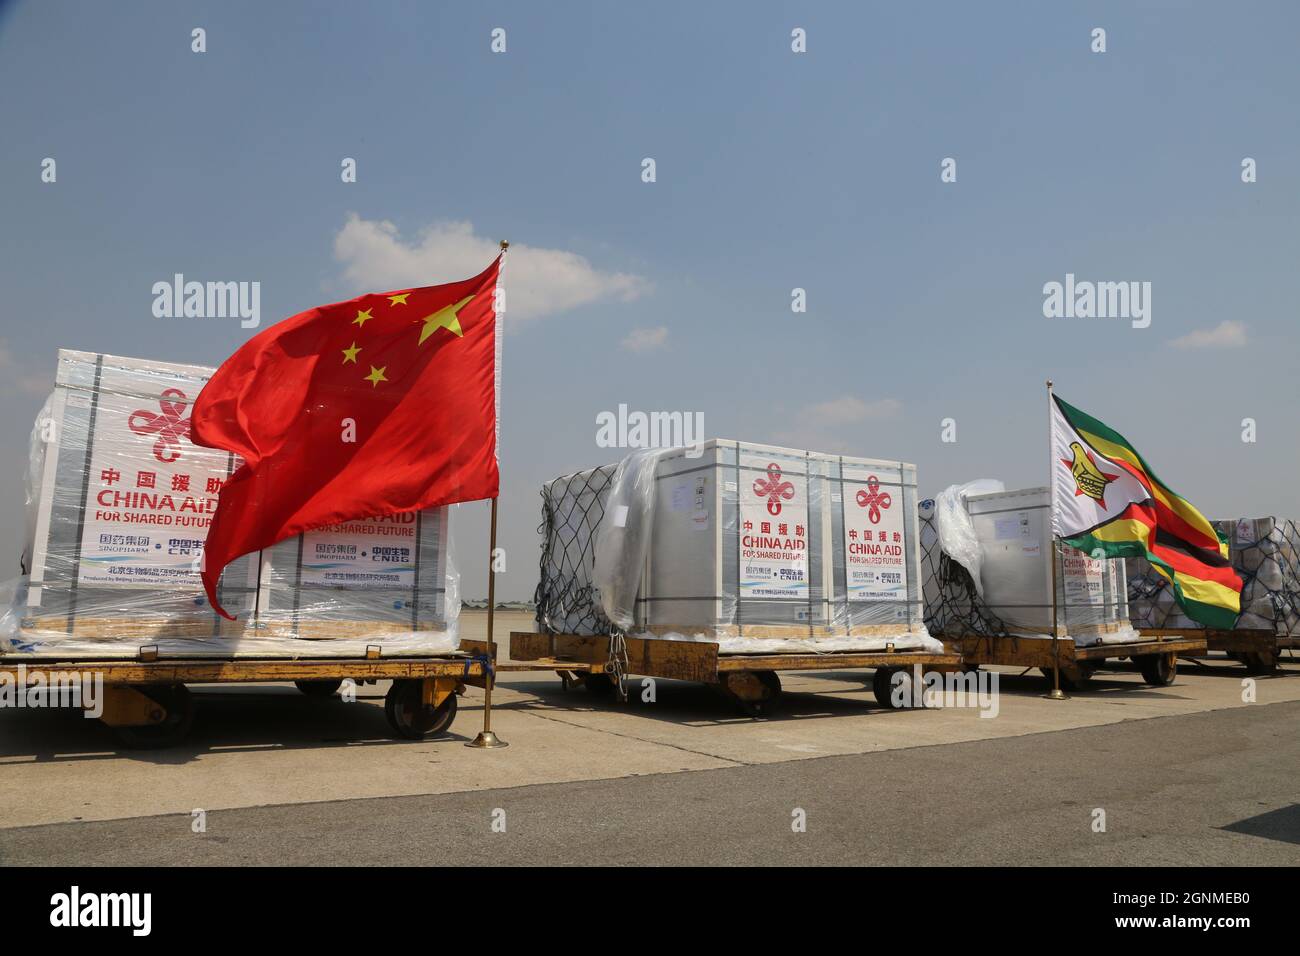 Harare. 26th Sep, 2021. Photo taken on Sept. 26, 2021 show the Sinopharm COVID-19 vaccine donated by China at Robert Gabriel Mugabe International Airport in Harare, Zimbabwe. Zimbabwe on Sunday received the fourth batch of Sinopharm COVID-19 vaccine doses from China. Credit: Chen Yaqin/Xinhua/Alamy Live News Stock Photo